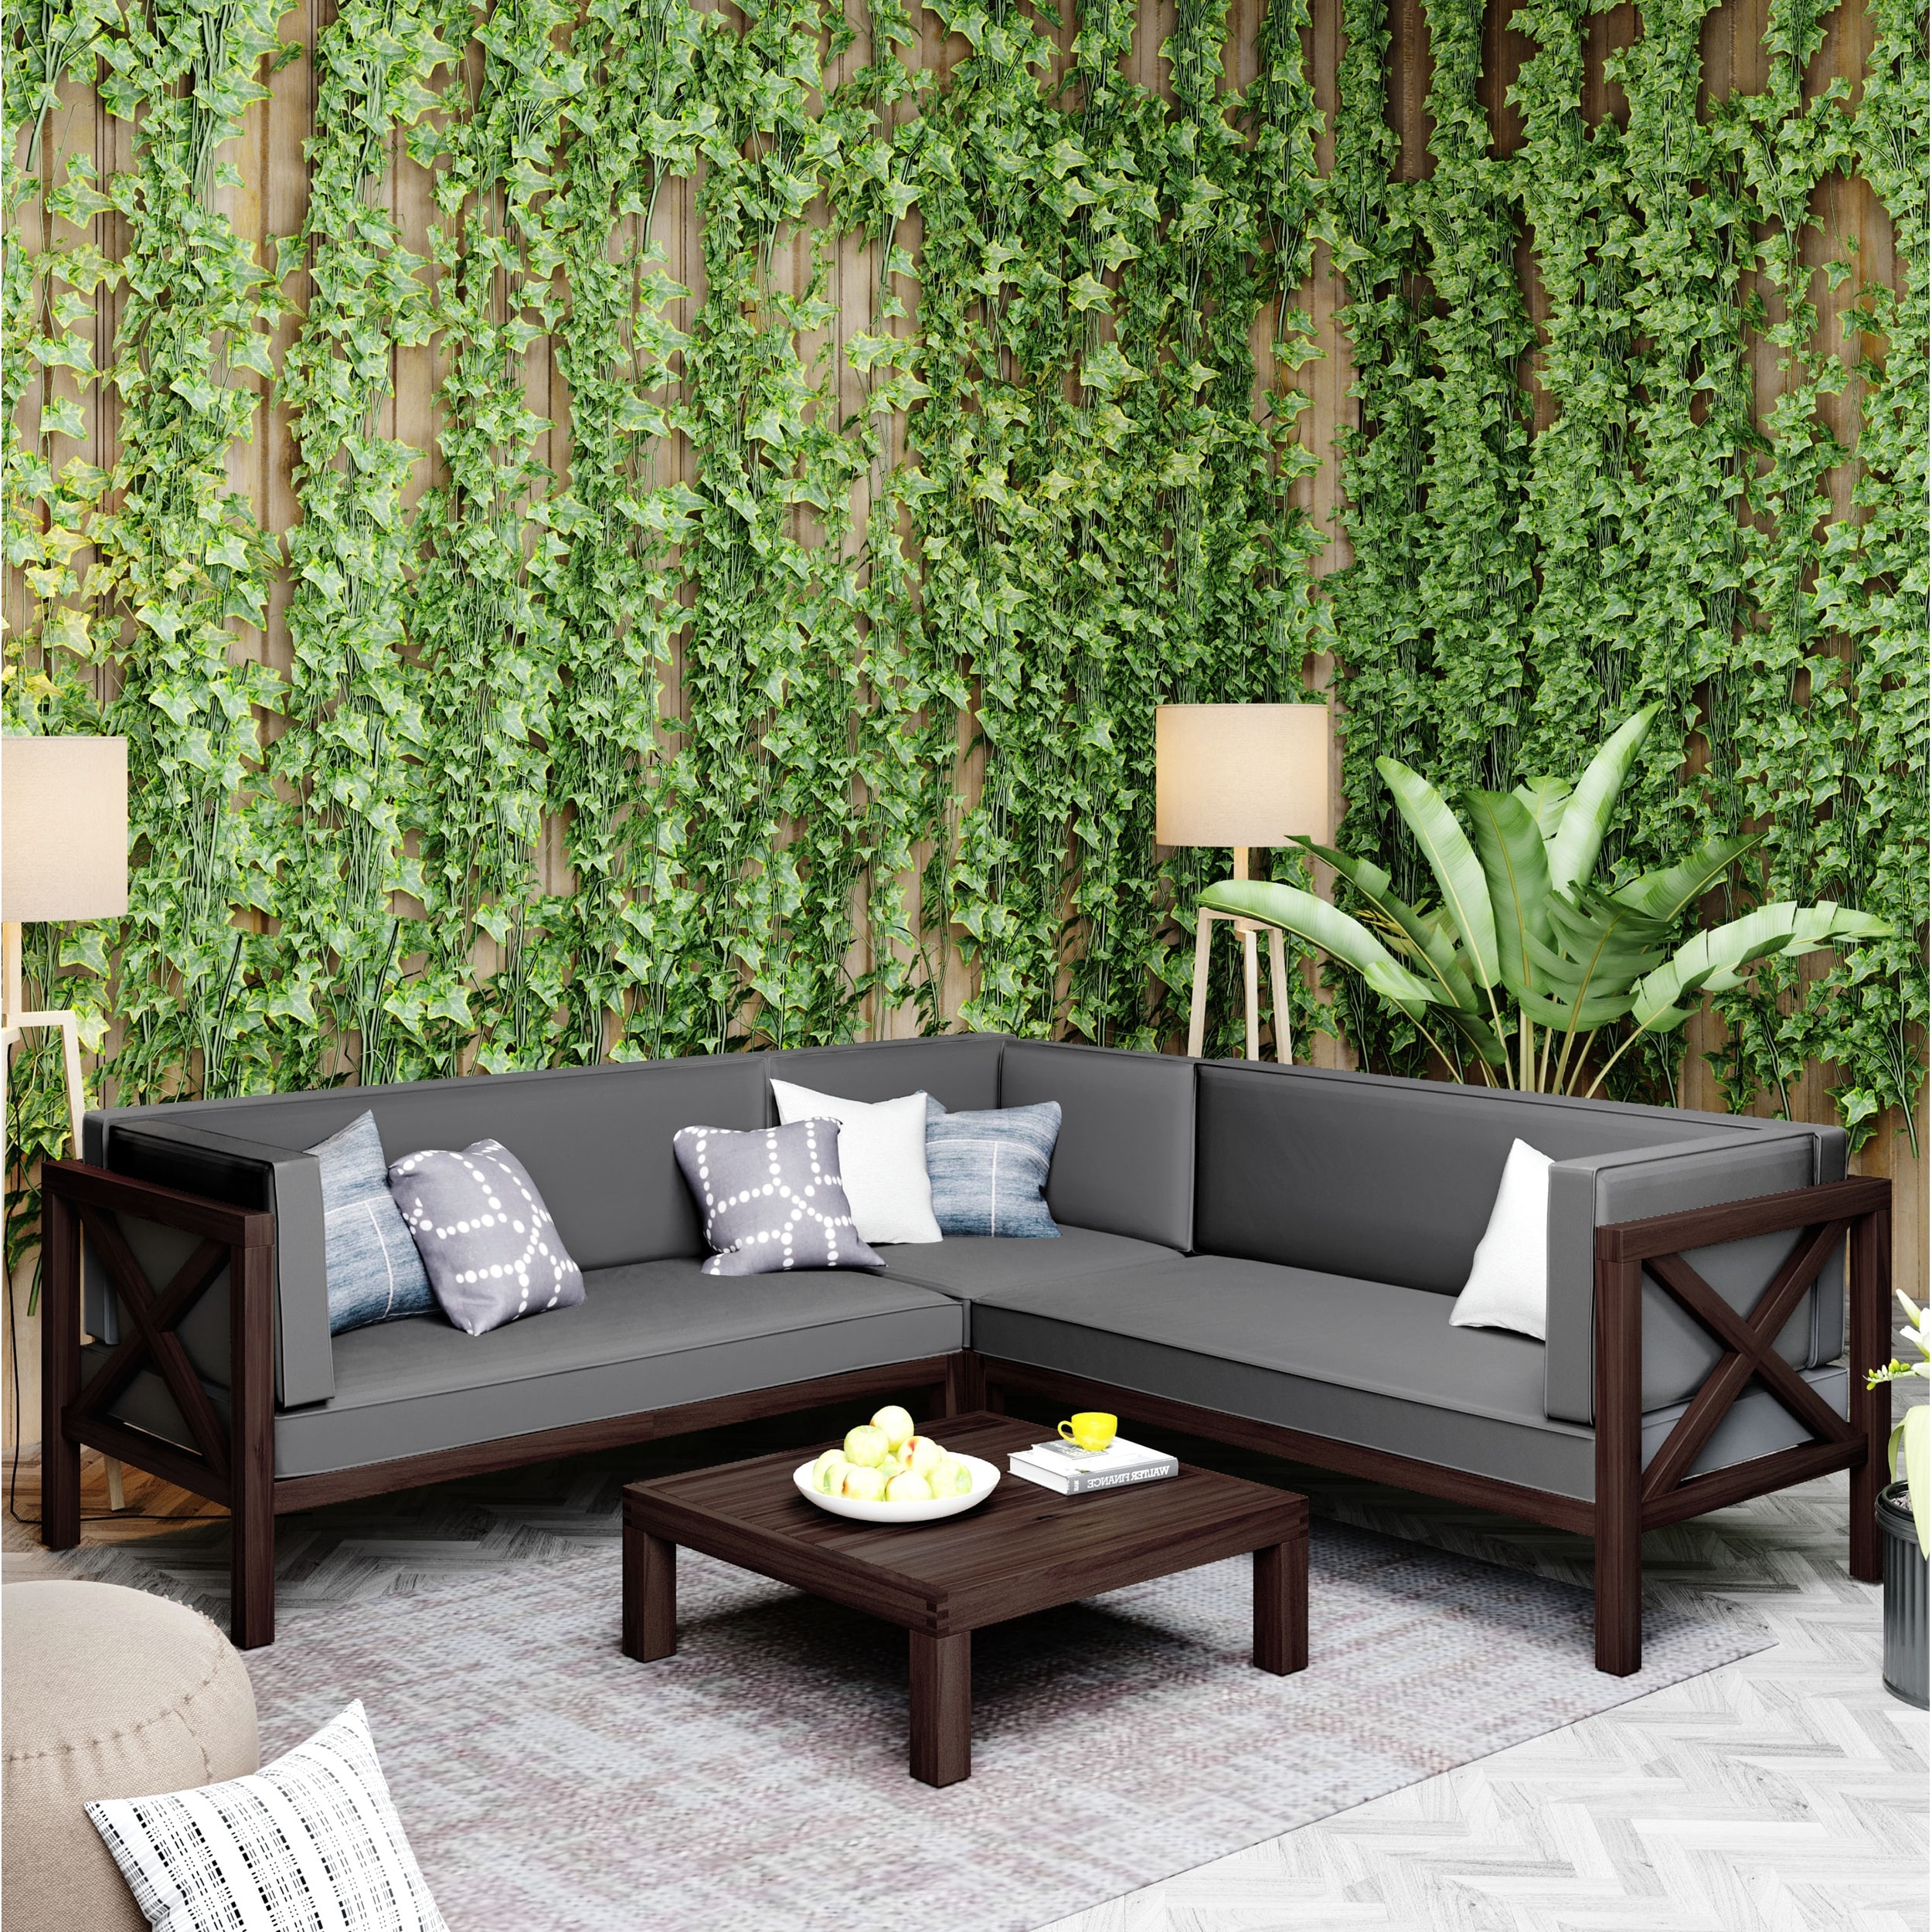 Outdoor Corner Design Patio Sectional Sofa Set With Wooden X-back Frames And Cushions